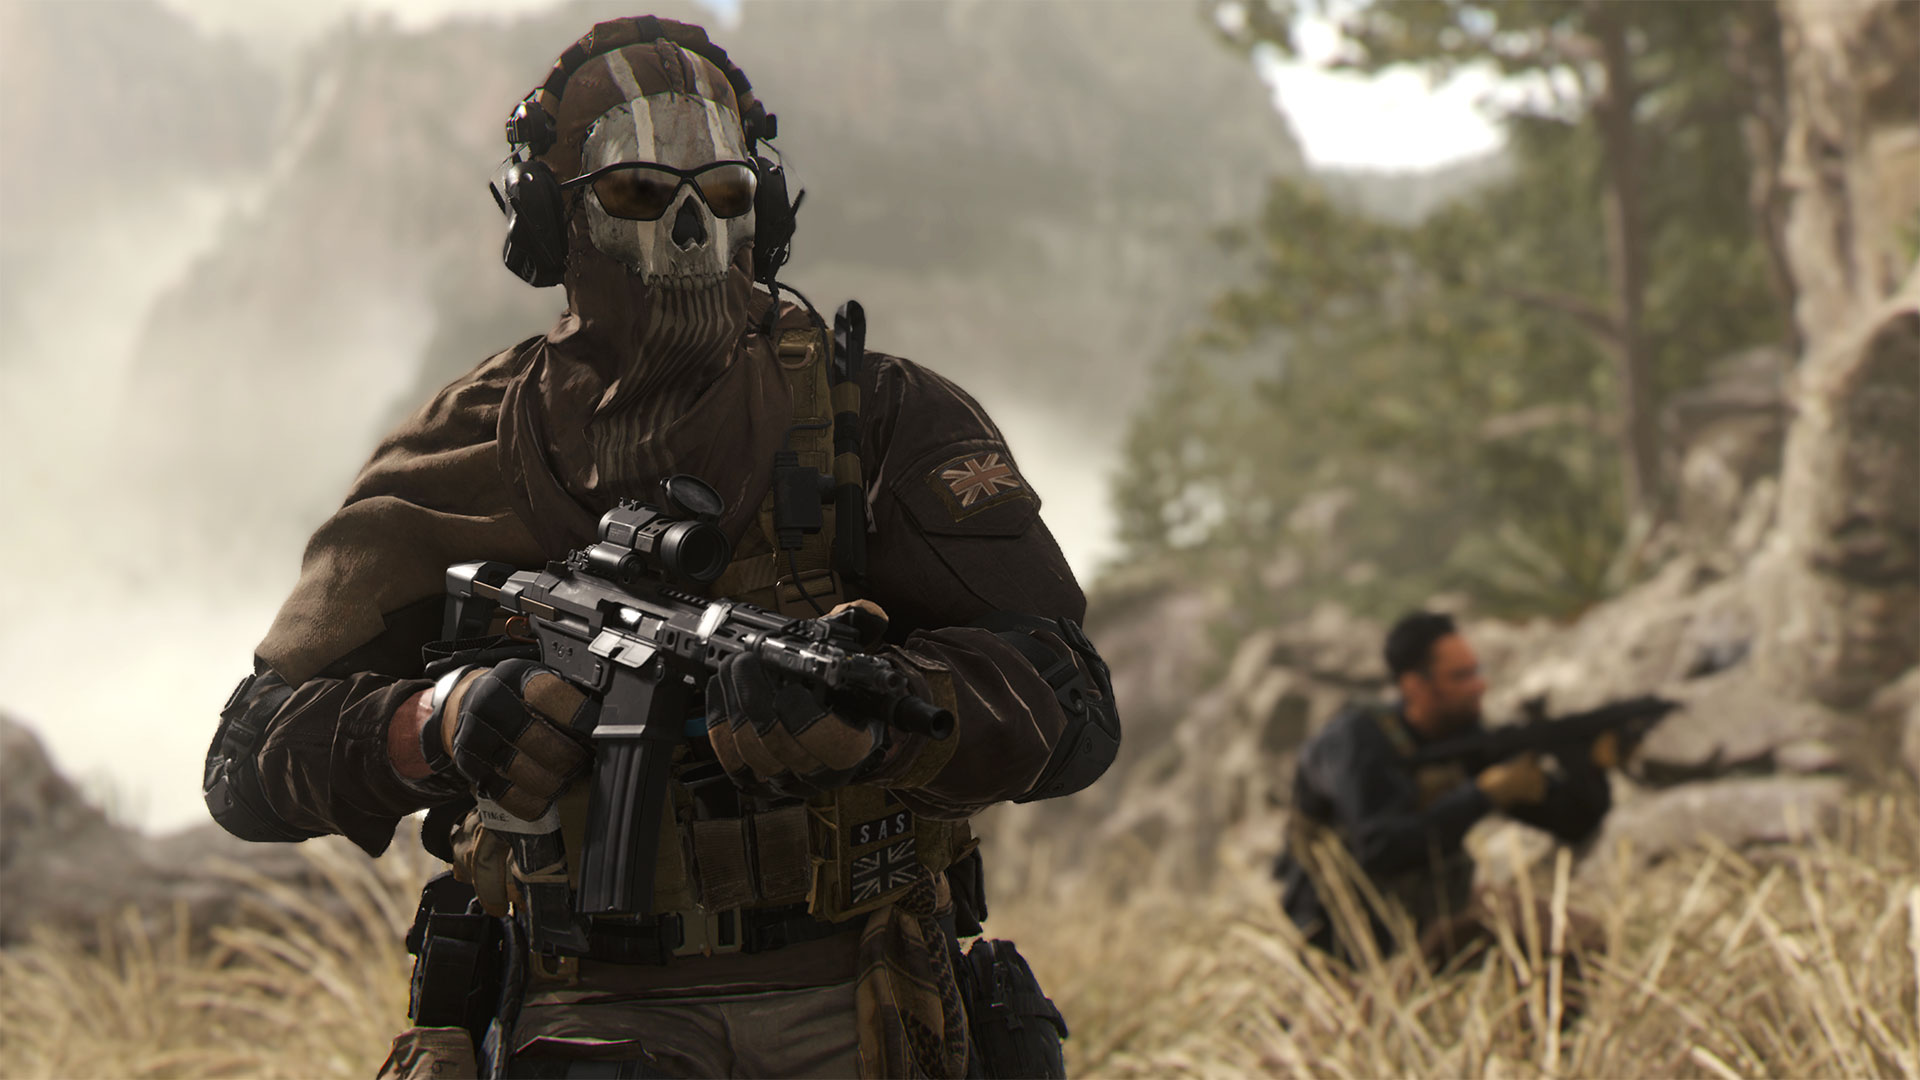 Microsoft now implies that it will support Call of Duty on PlayStation  forever